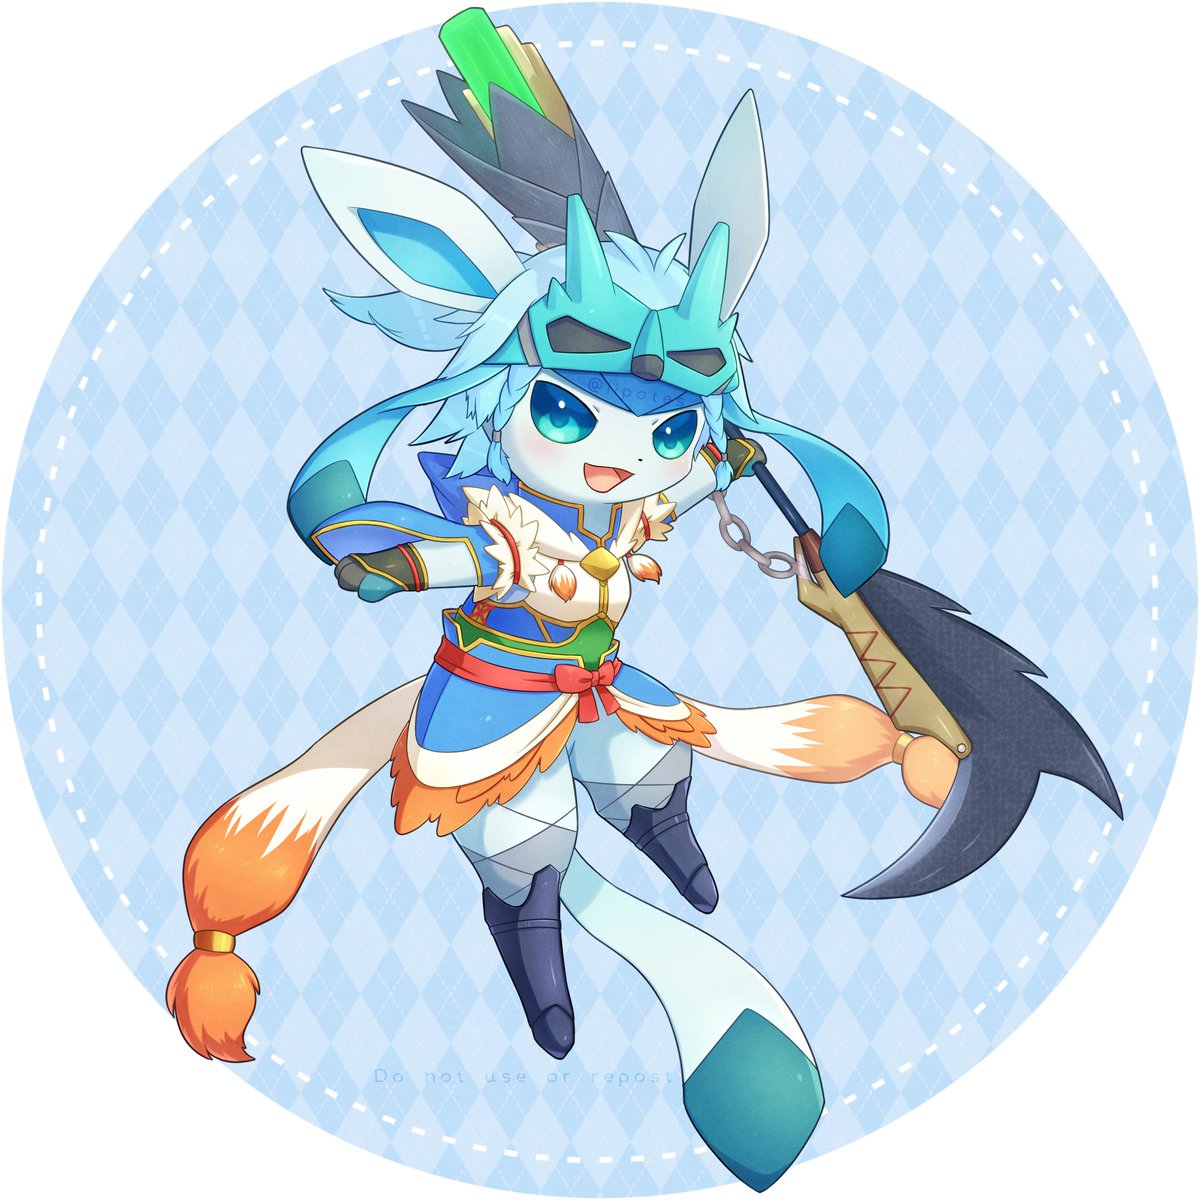 glaceon pokemon (creature) clothed pokemon open mouth smile full body armor holding  illustration images